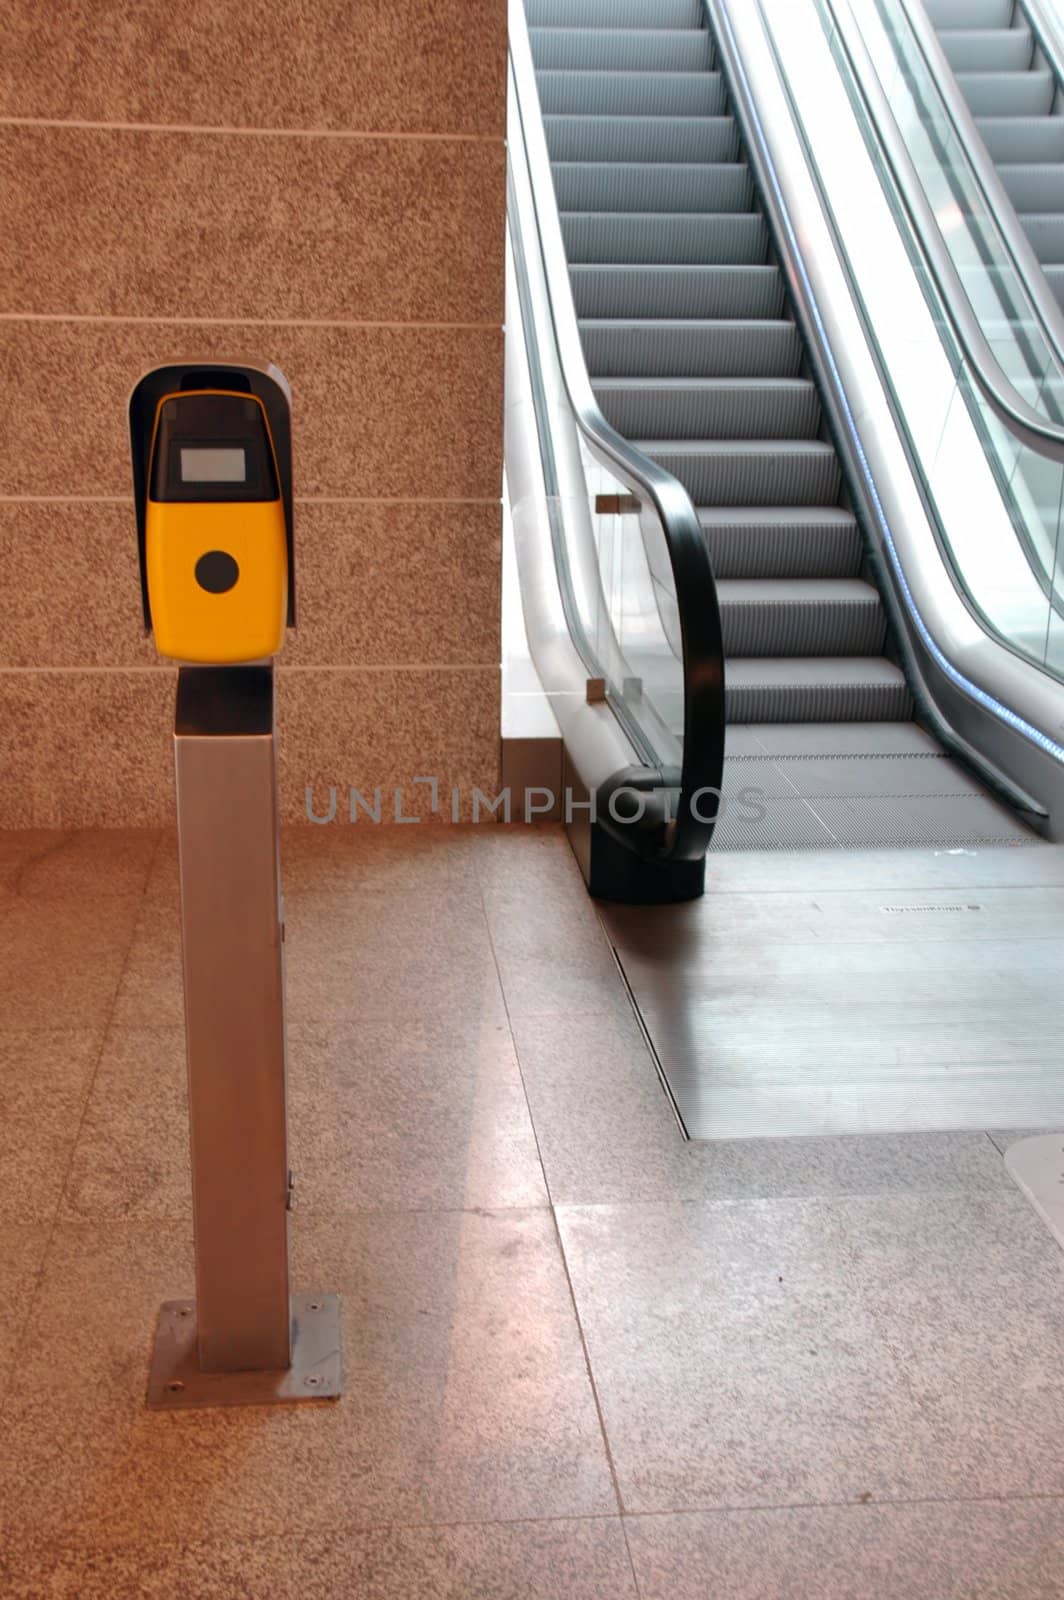 ticket validation machines and escalator by raalves